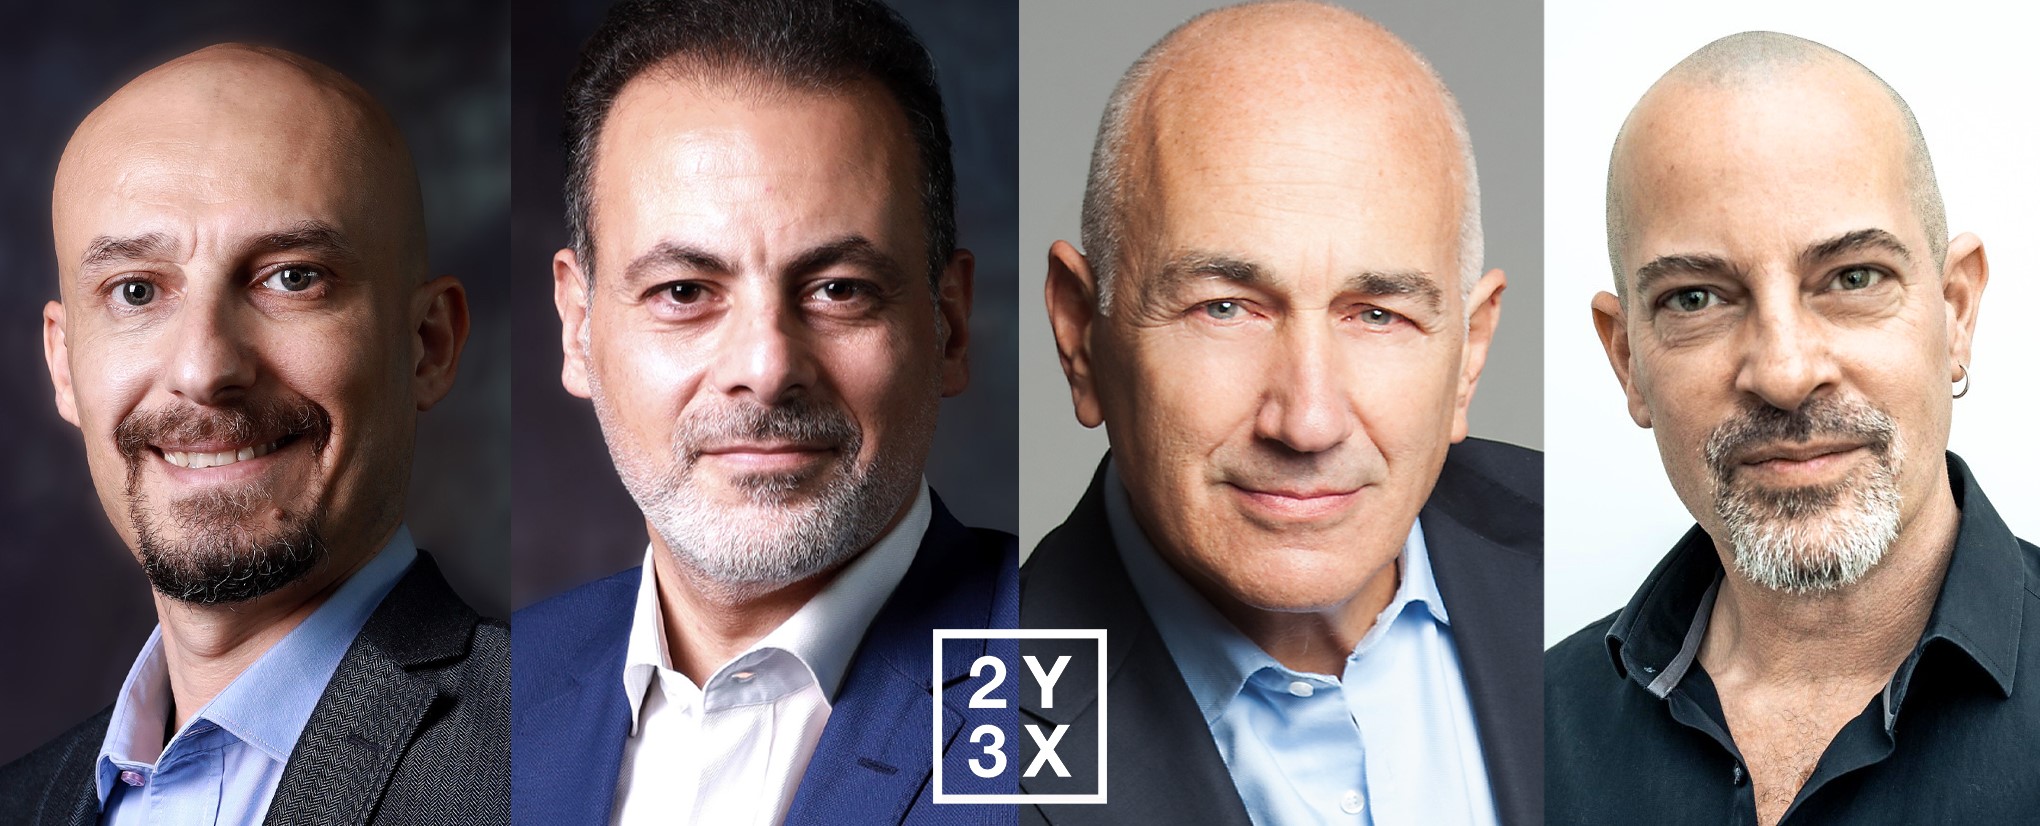 “2Y3X® Programme to launch in the MENA region”